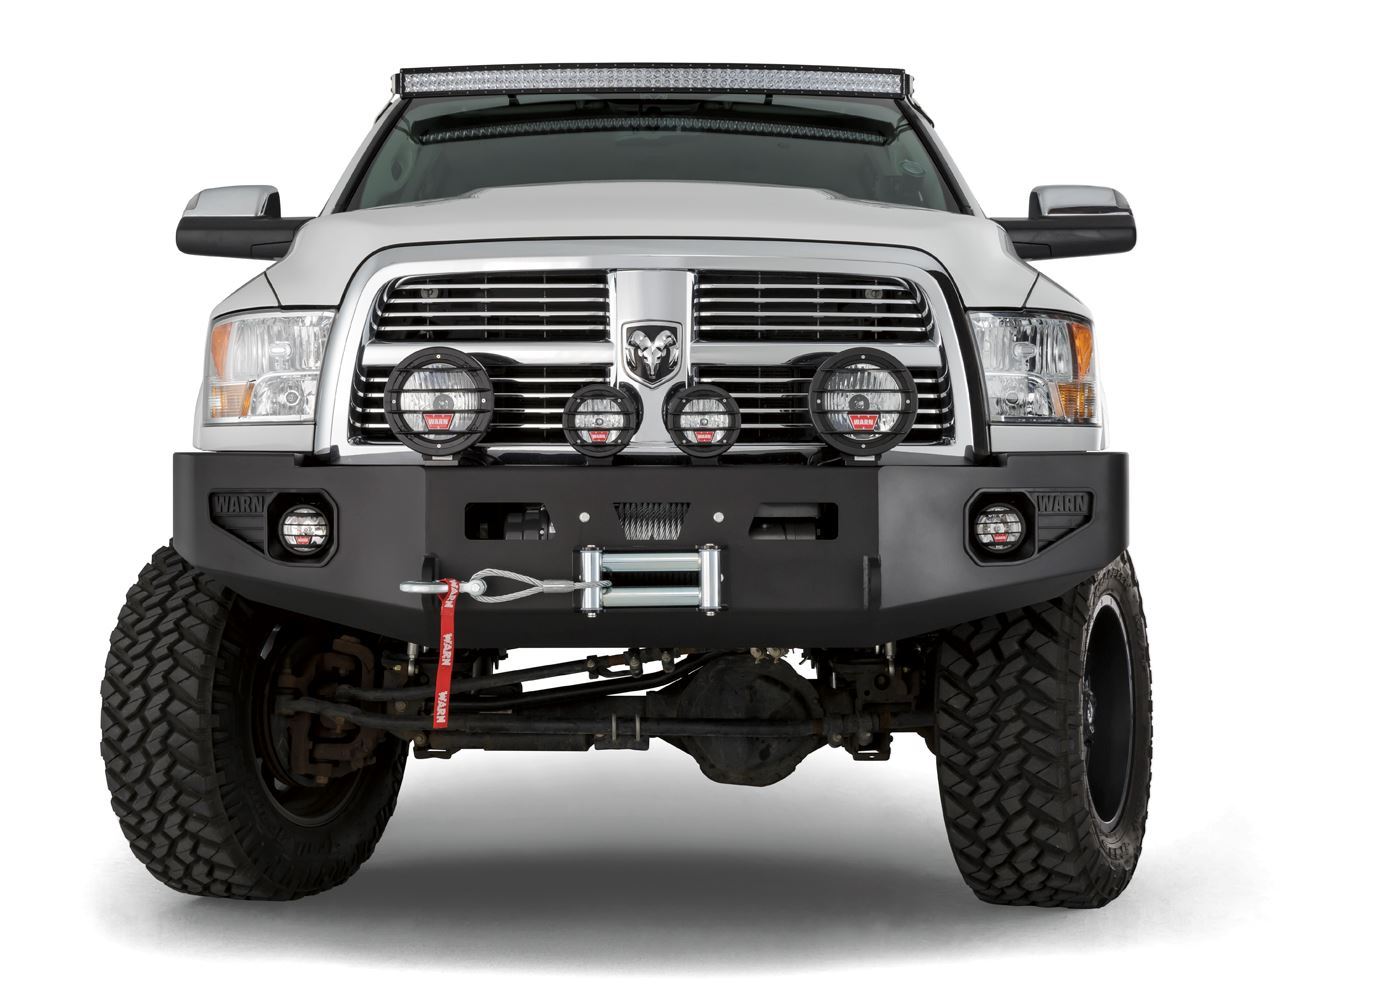 HD Front Bumper Without Brush Guard for 2010-2019 Dodge Ram 2500/3500